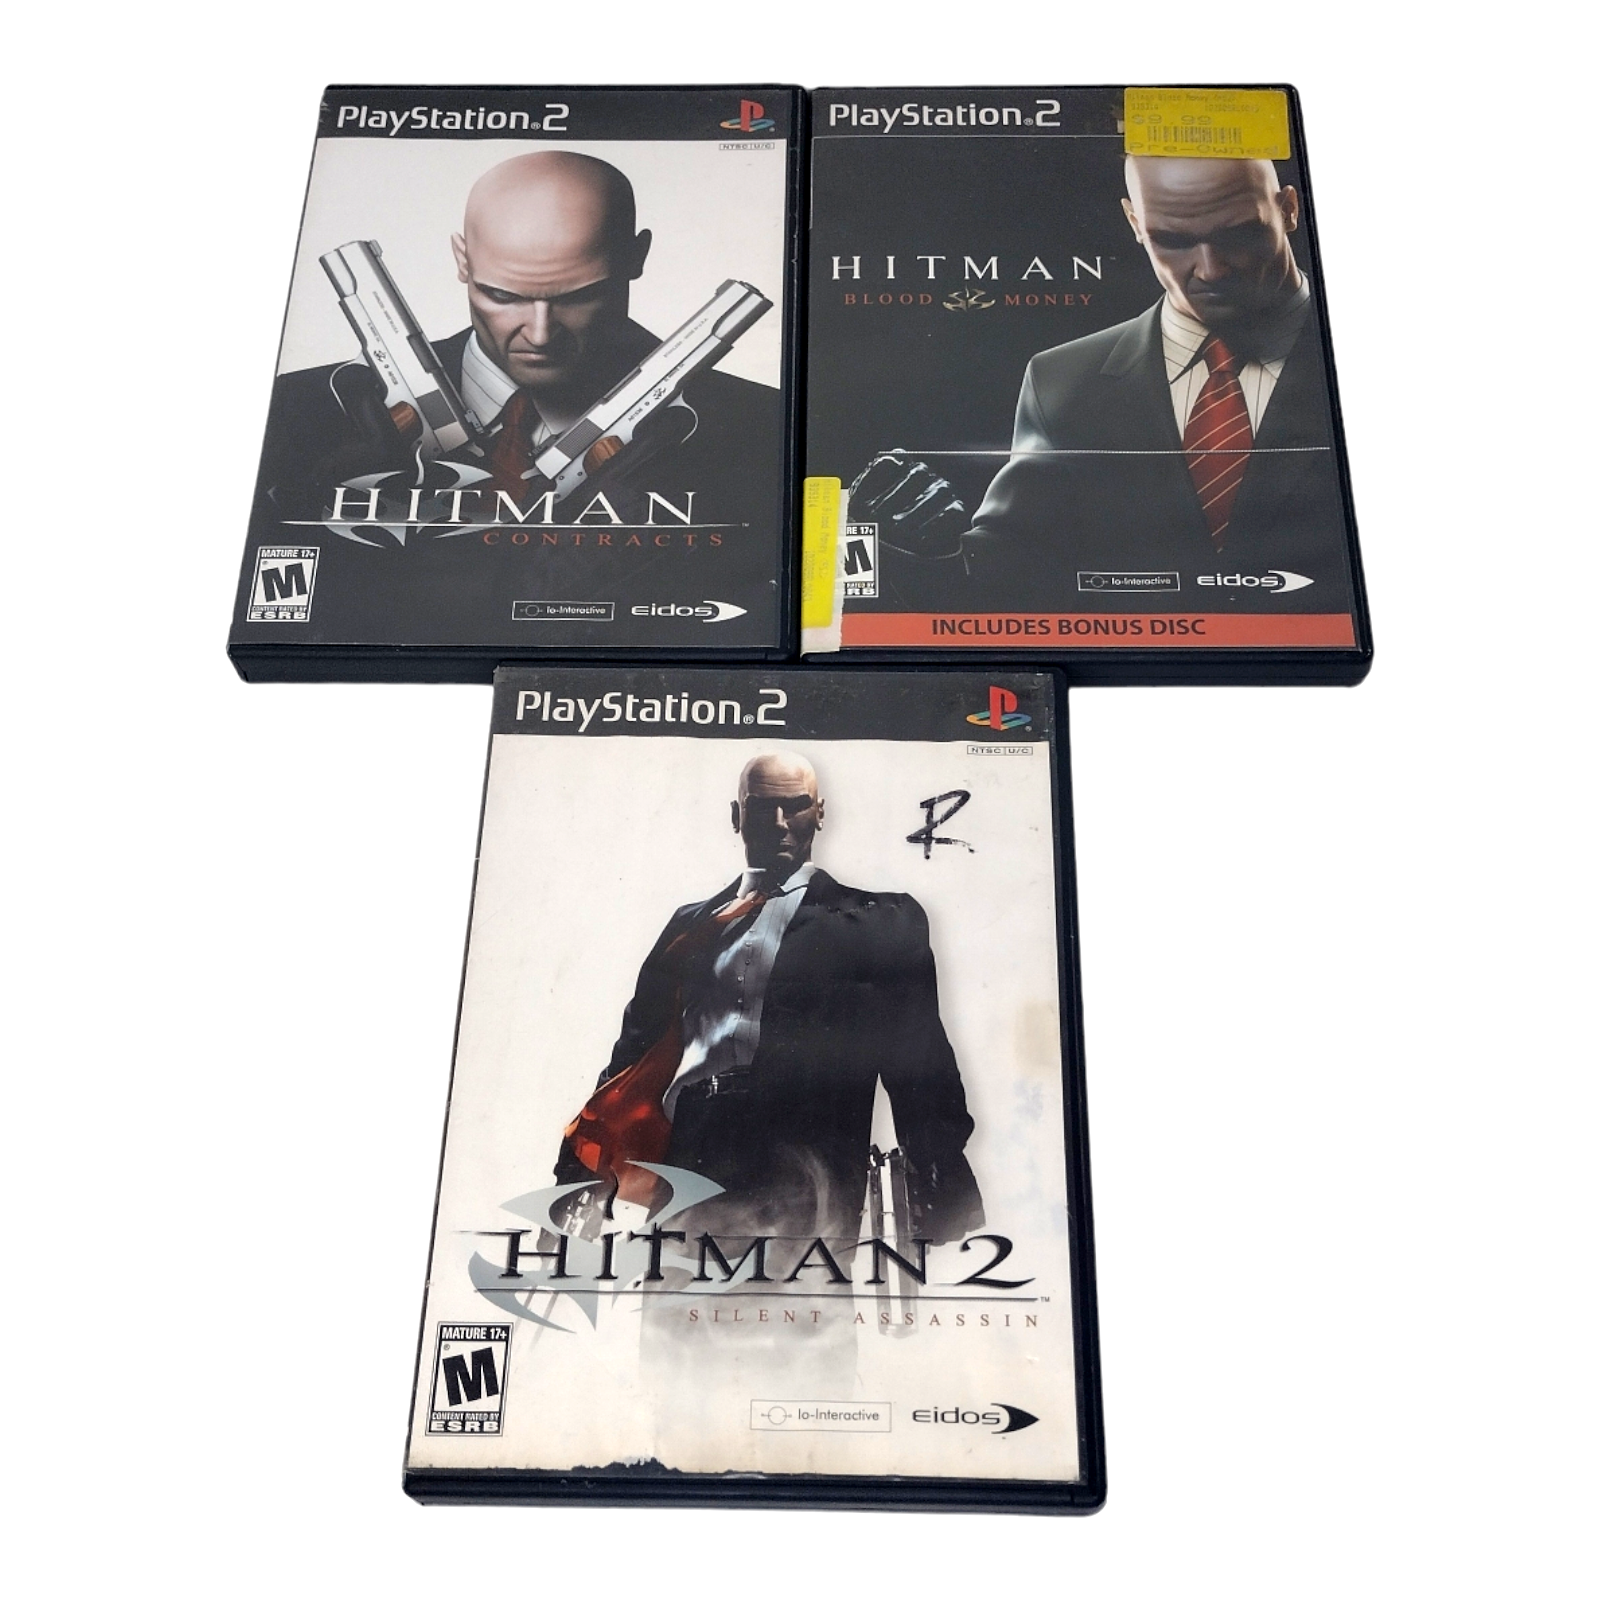 Primary image for Lot of 3 Hitman Games PlayStation 2 PS2: Contracts, Blood Money, & Hitman 2